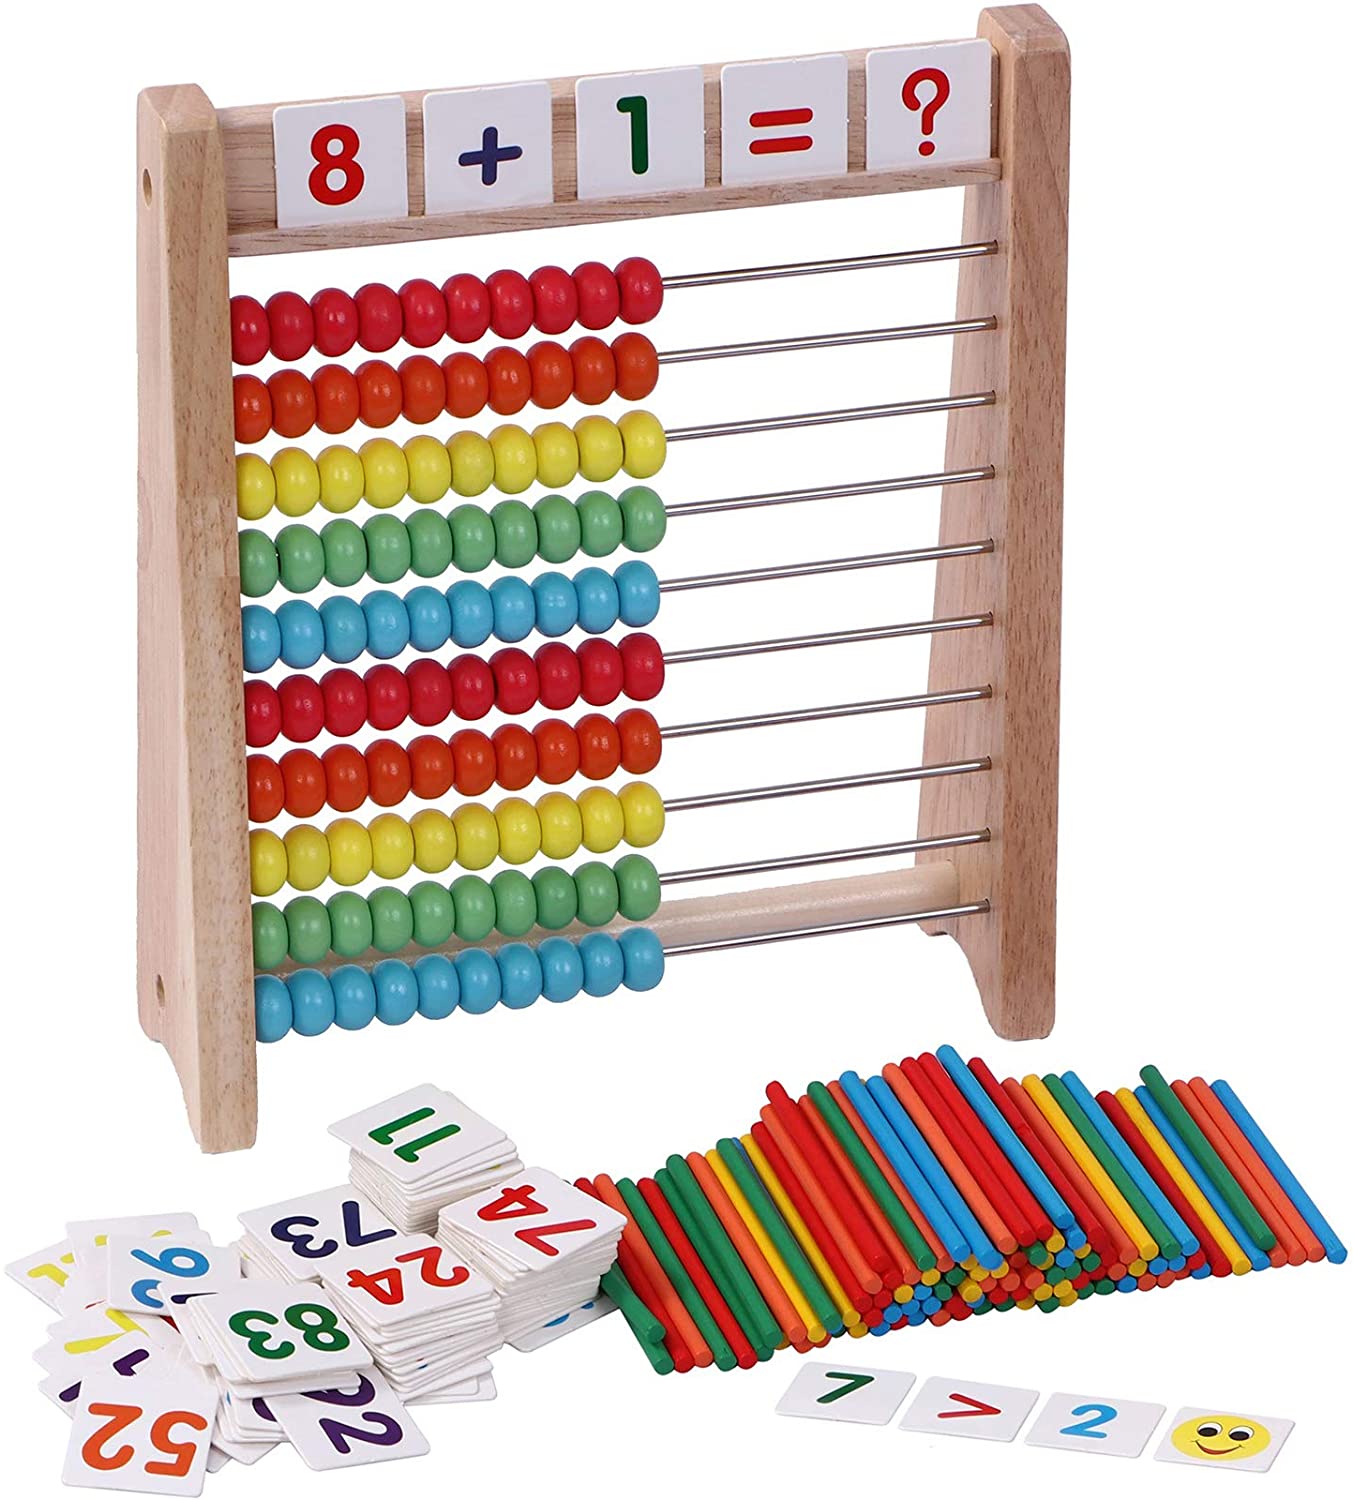 Hot WOODEN ABACUS COUNITNG NUMBER FRAME LEARNING MATH TOYS 